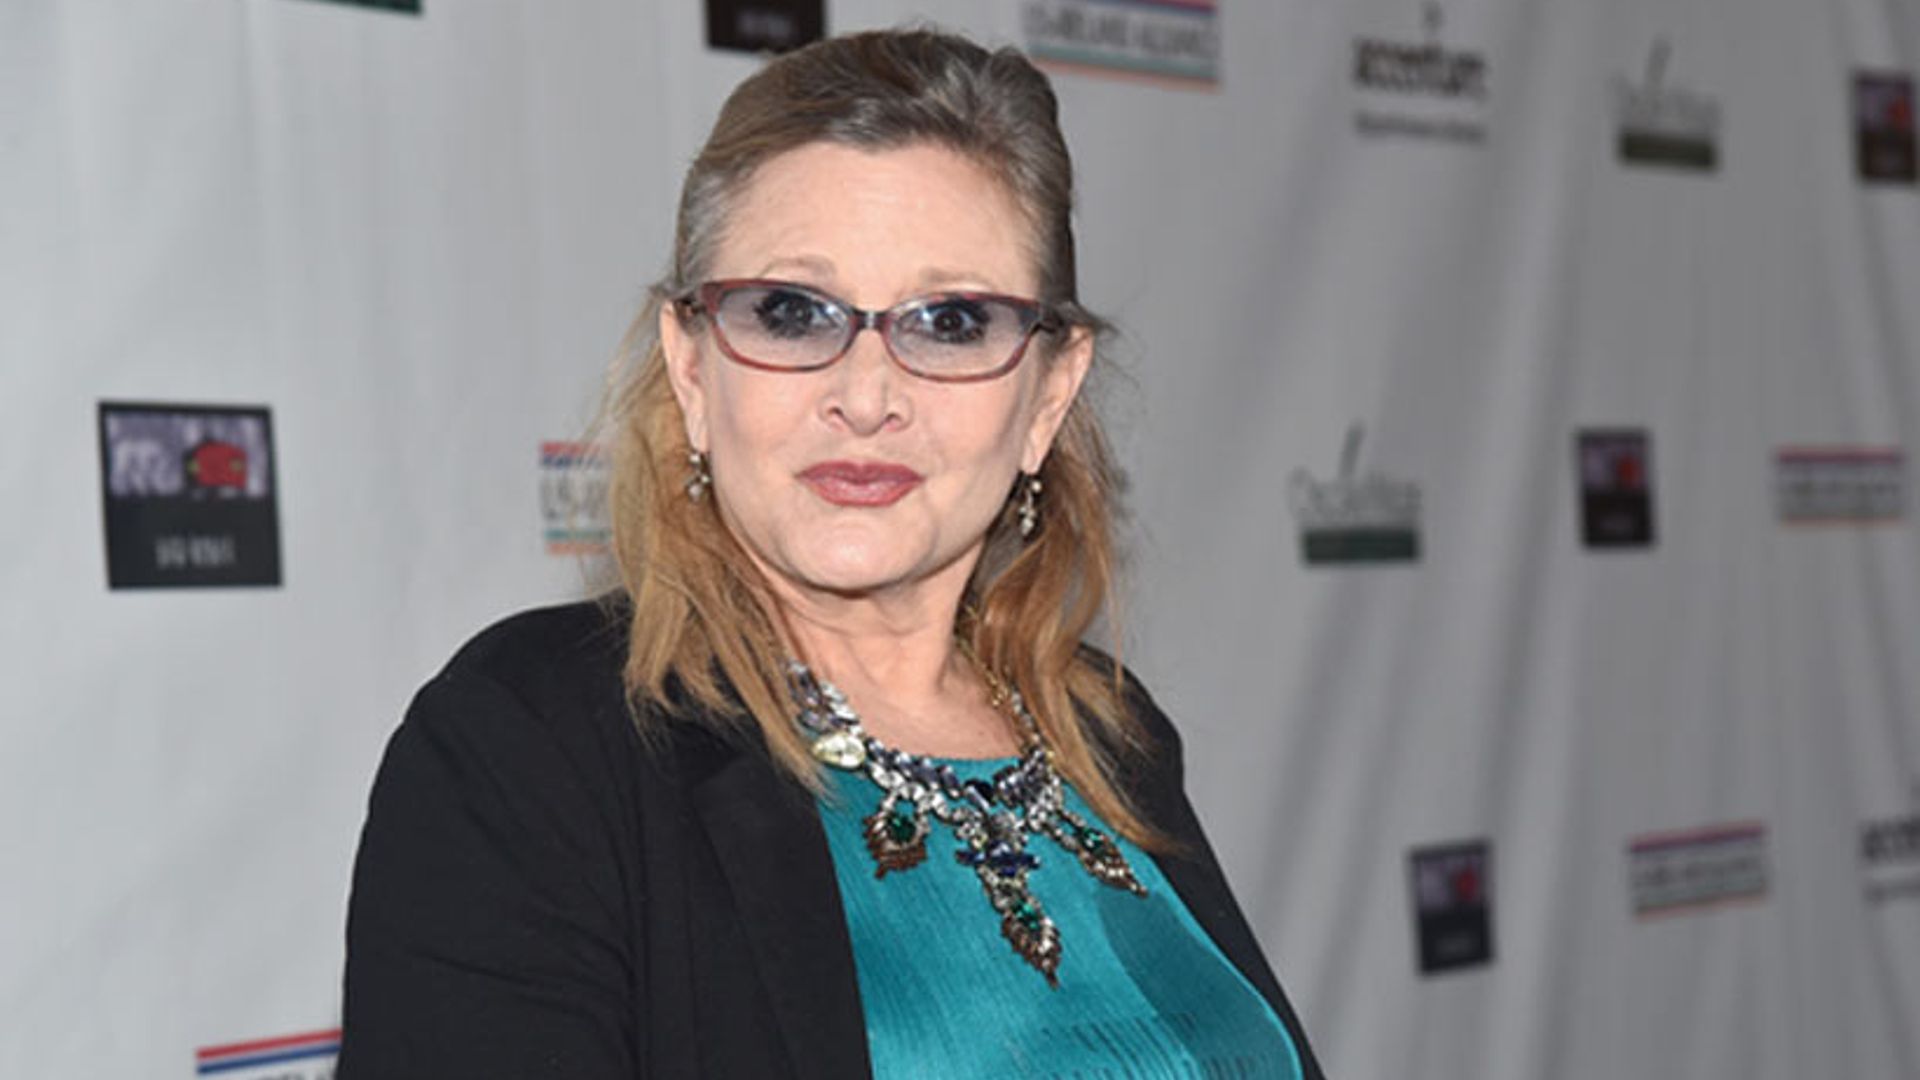 Carrie Fisher sent an unpleasant gift to a film producer who sexually assaulted her friend